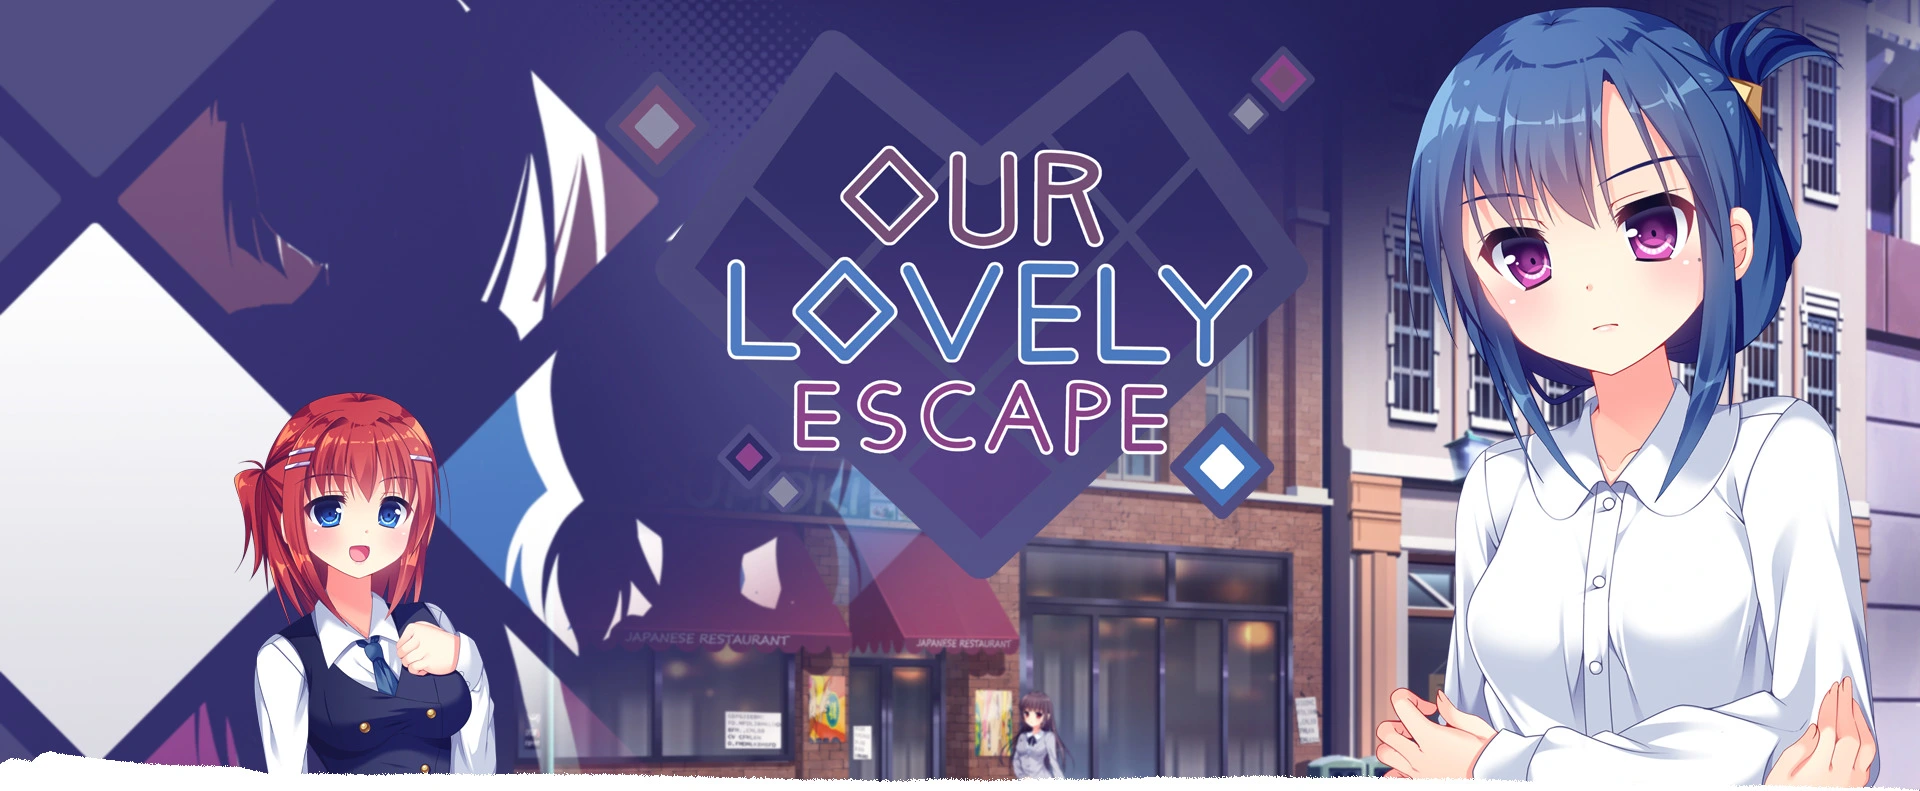 Our Lovely Escape main image